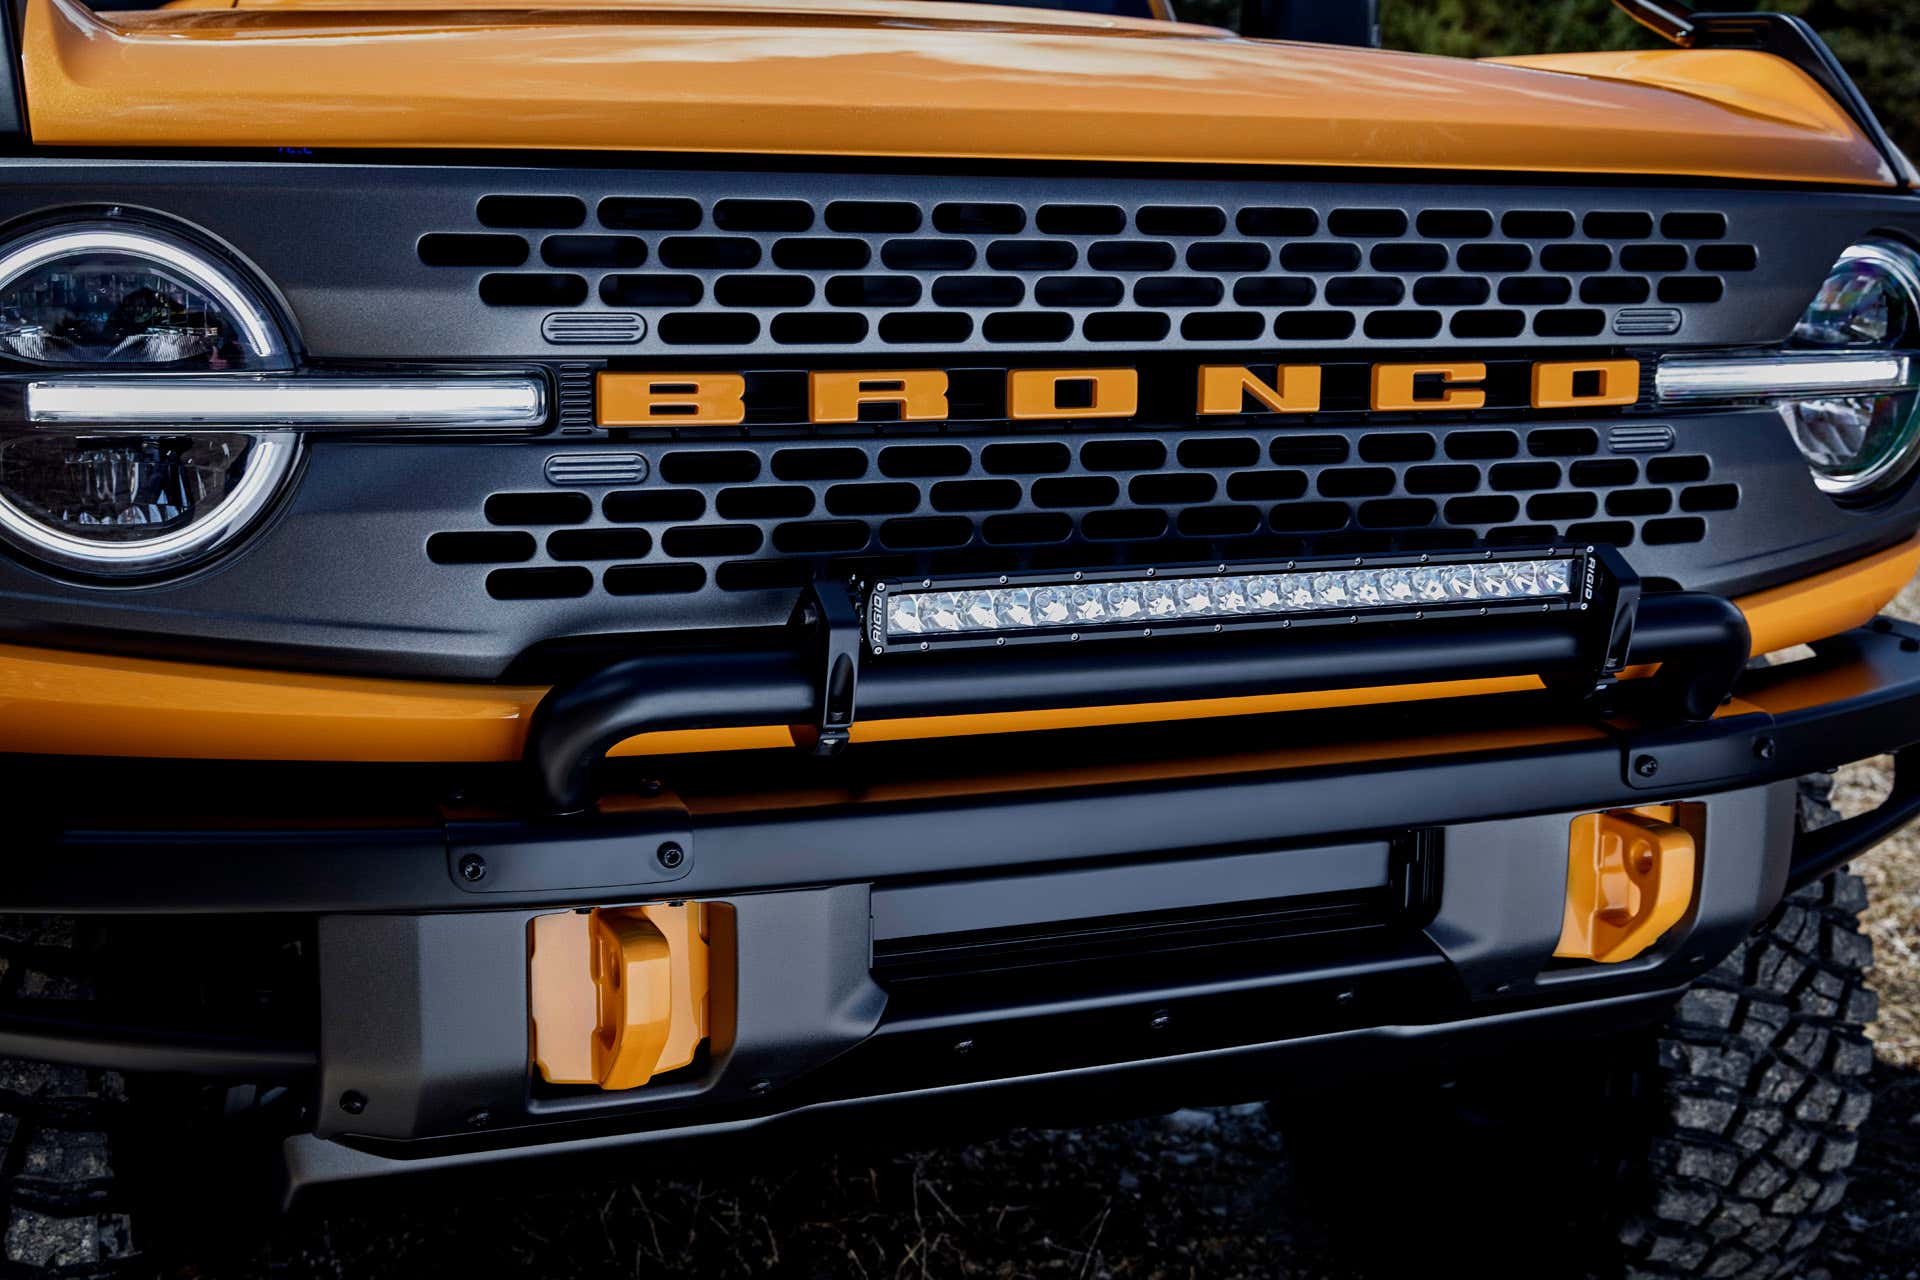 The 2021 Ford Bronco's Off-Road Features Make It an Actual Crime to